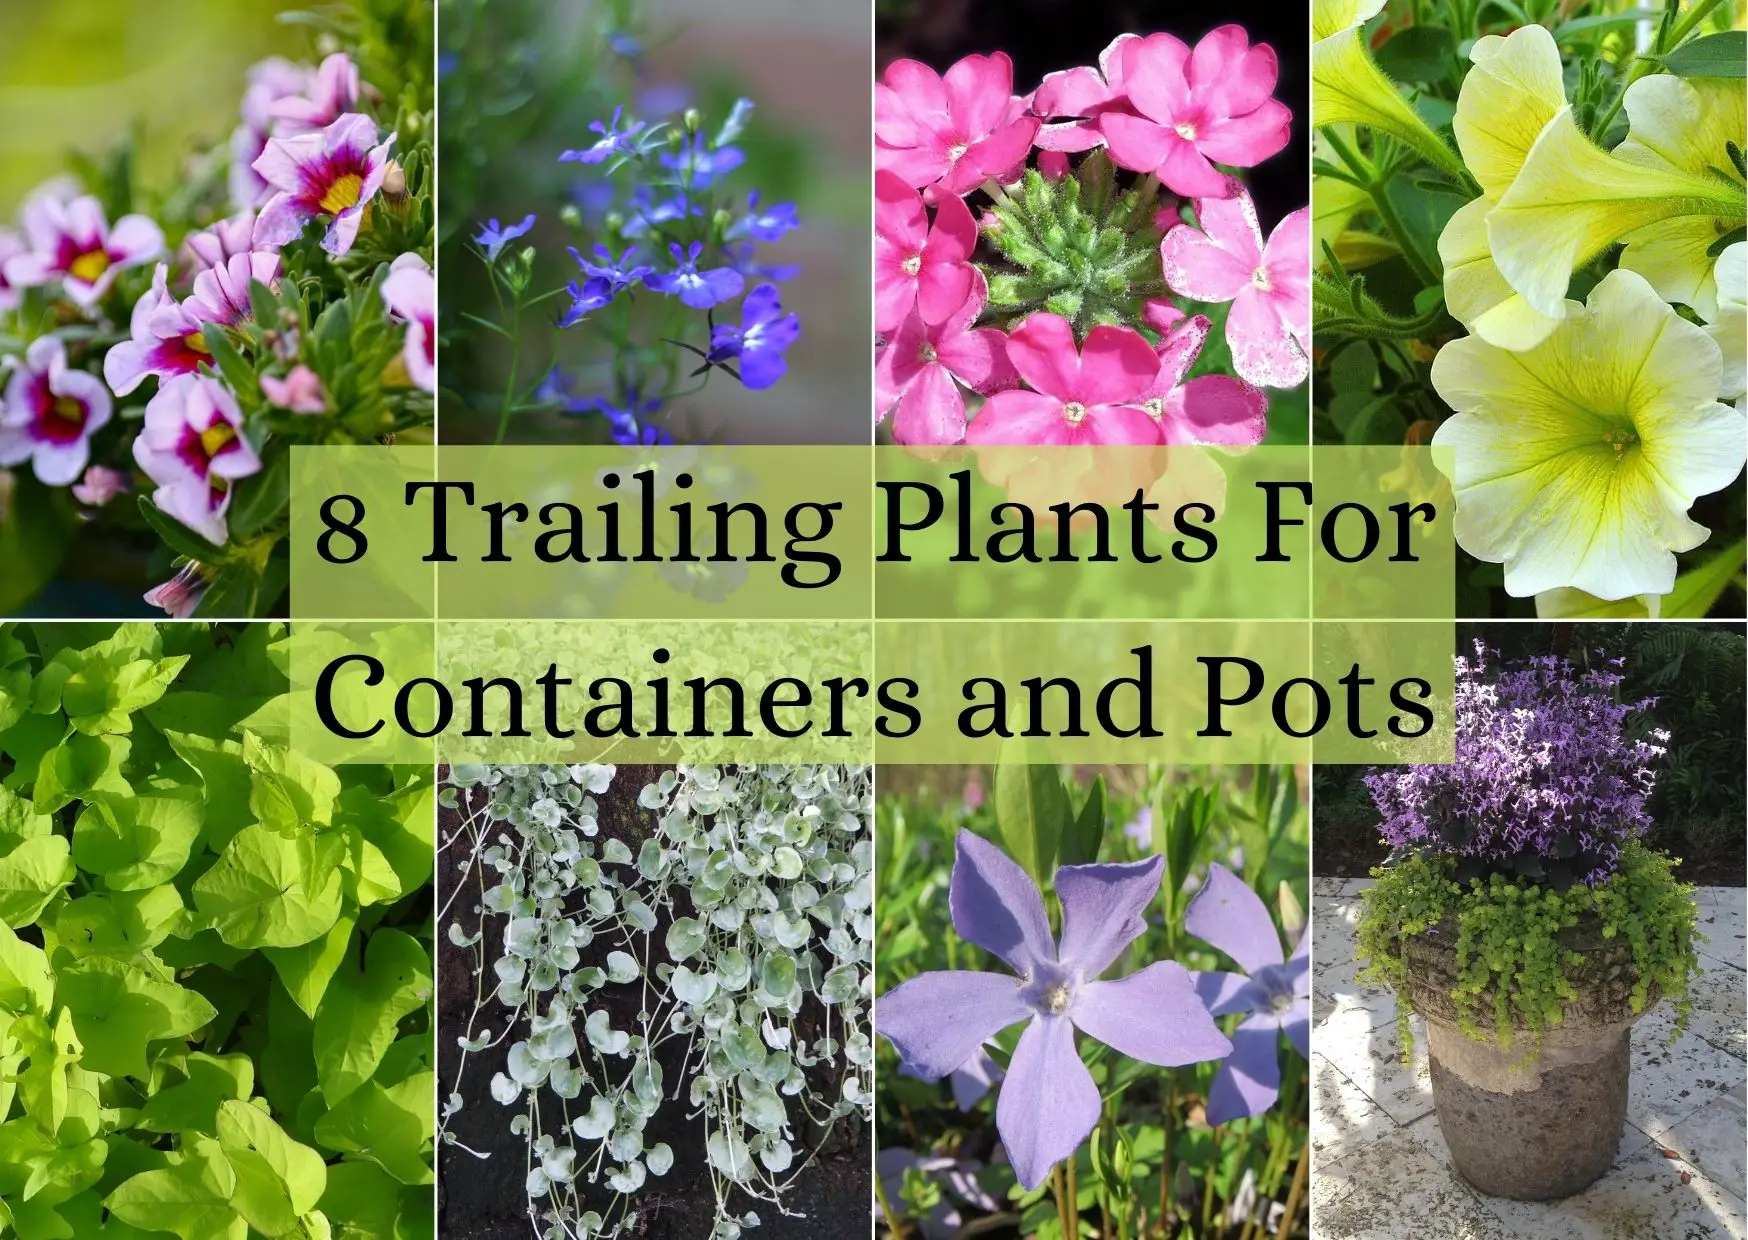 Trailing Plants For Containers and Pots